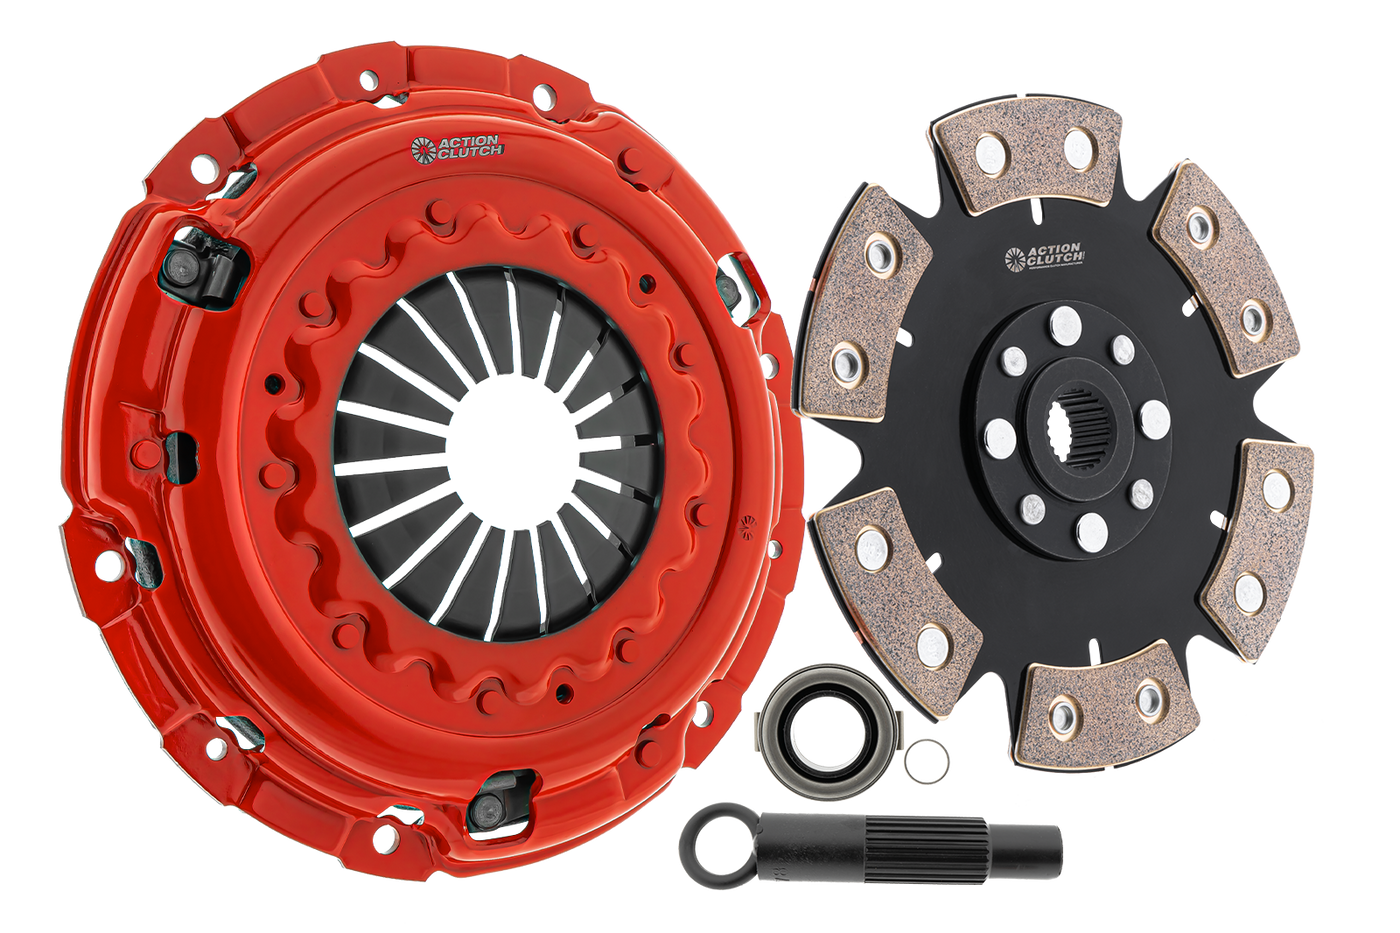 Stage 6 Clutch Kit (2MD) for Infiniti G35 2007-2008 3.5L (VQ35HR) With Heavy Duty Concentric Slave Cylinder